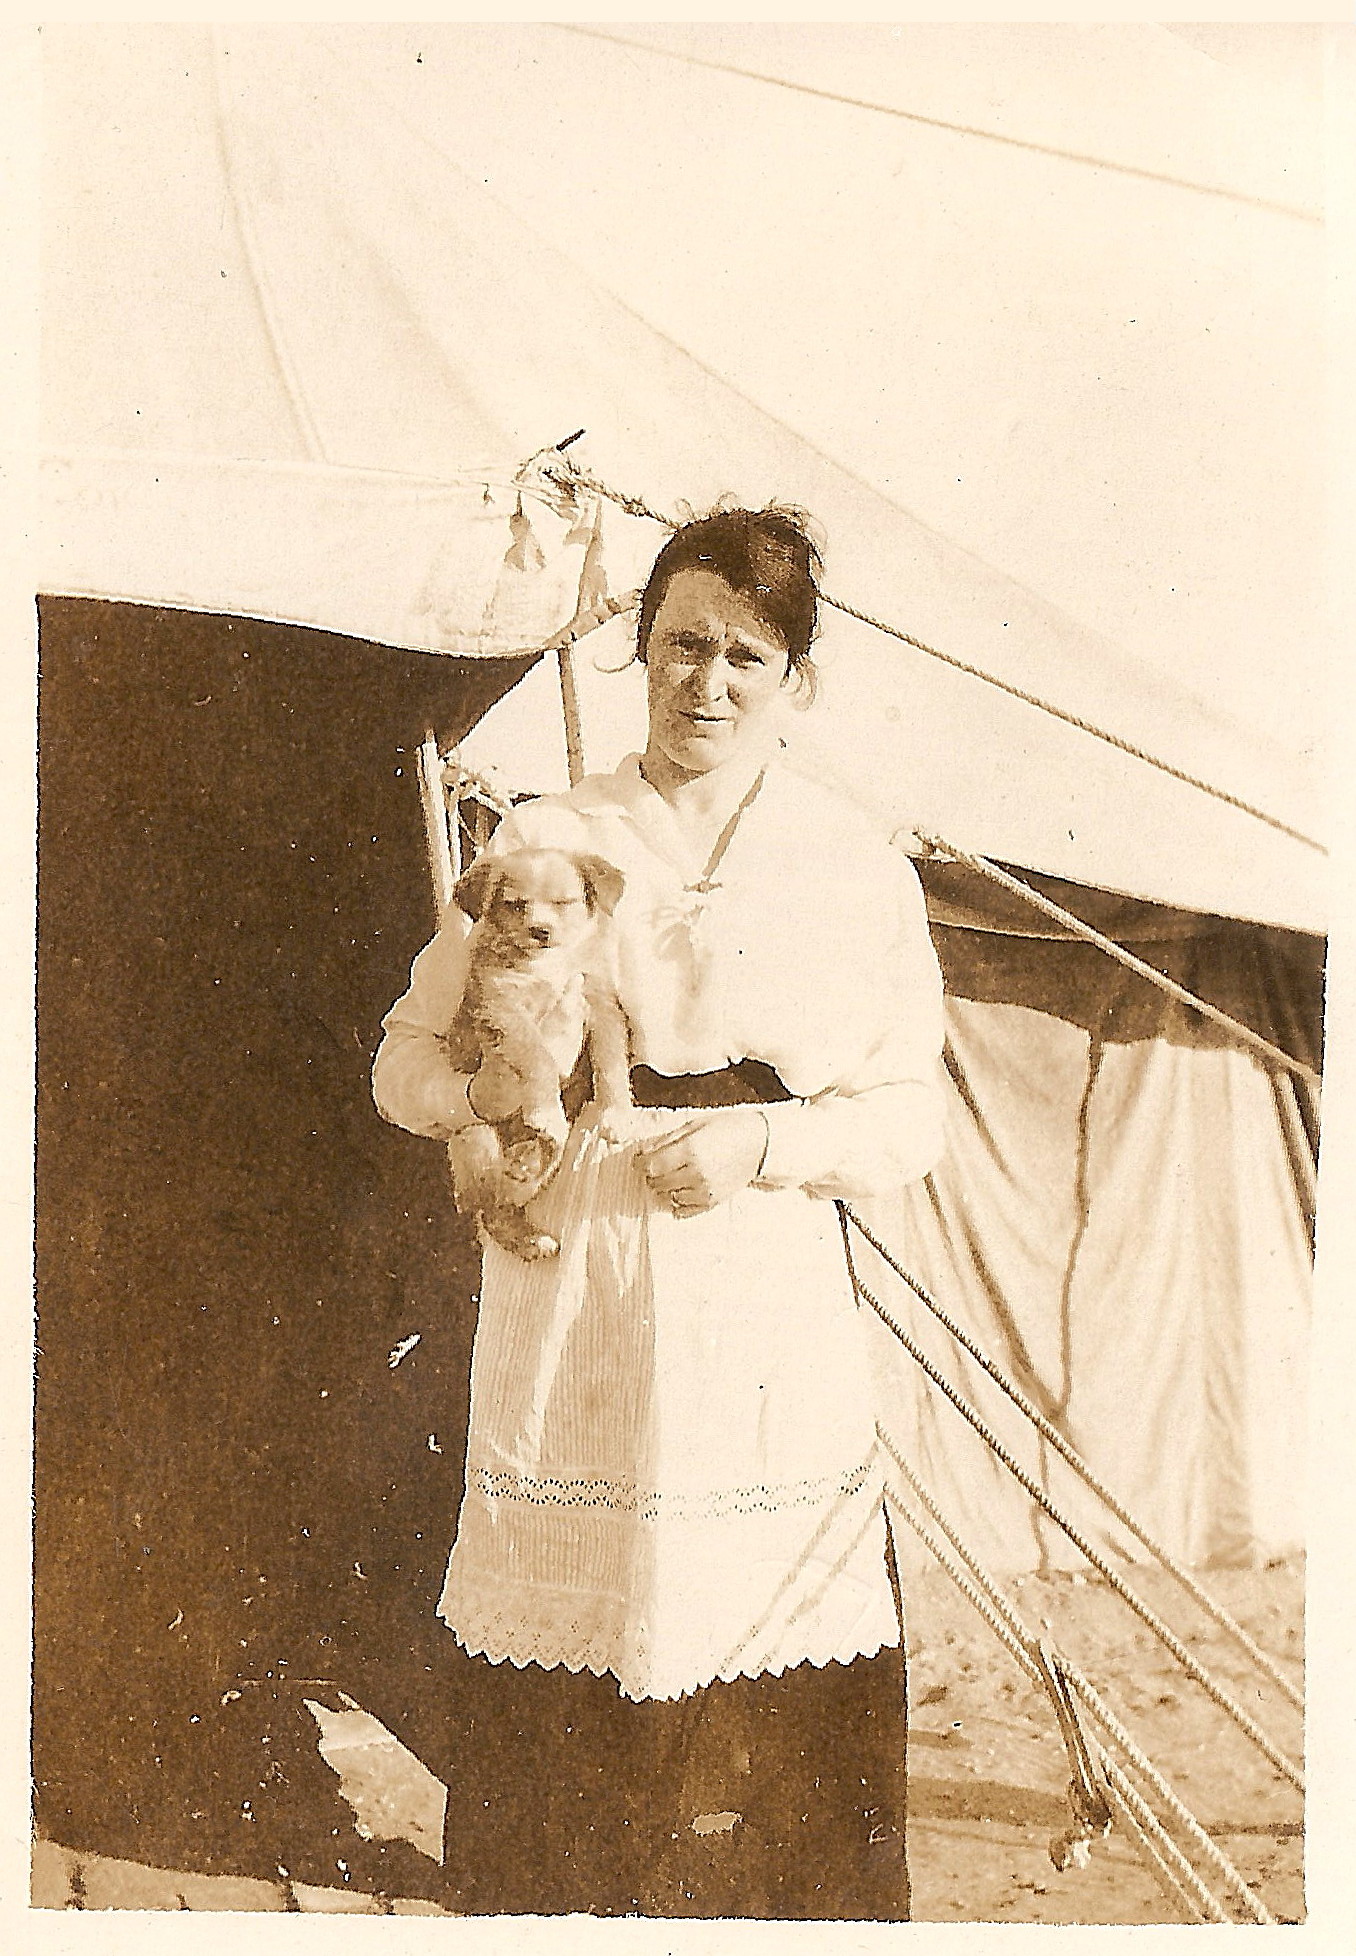 dark-haired woman in a long dark skirt and a white smock or apron, holding a puppy and standing in front of a tent